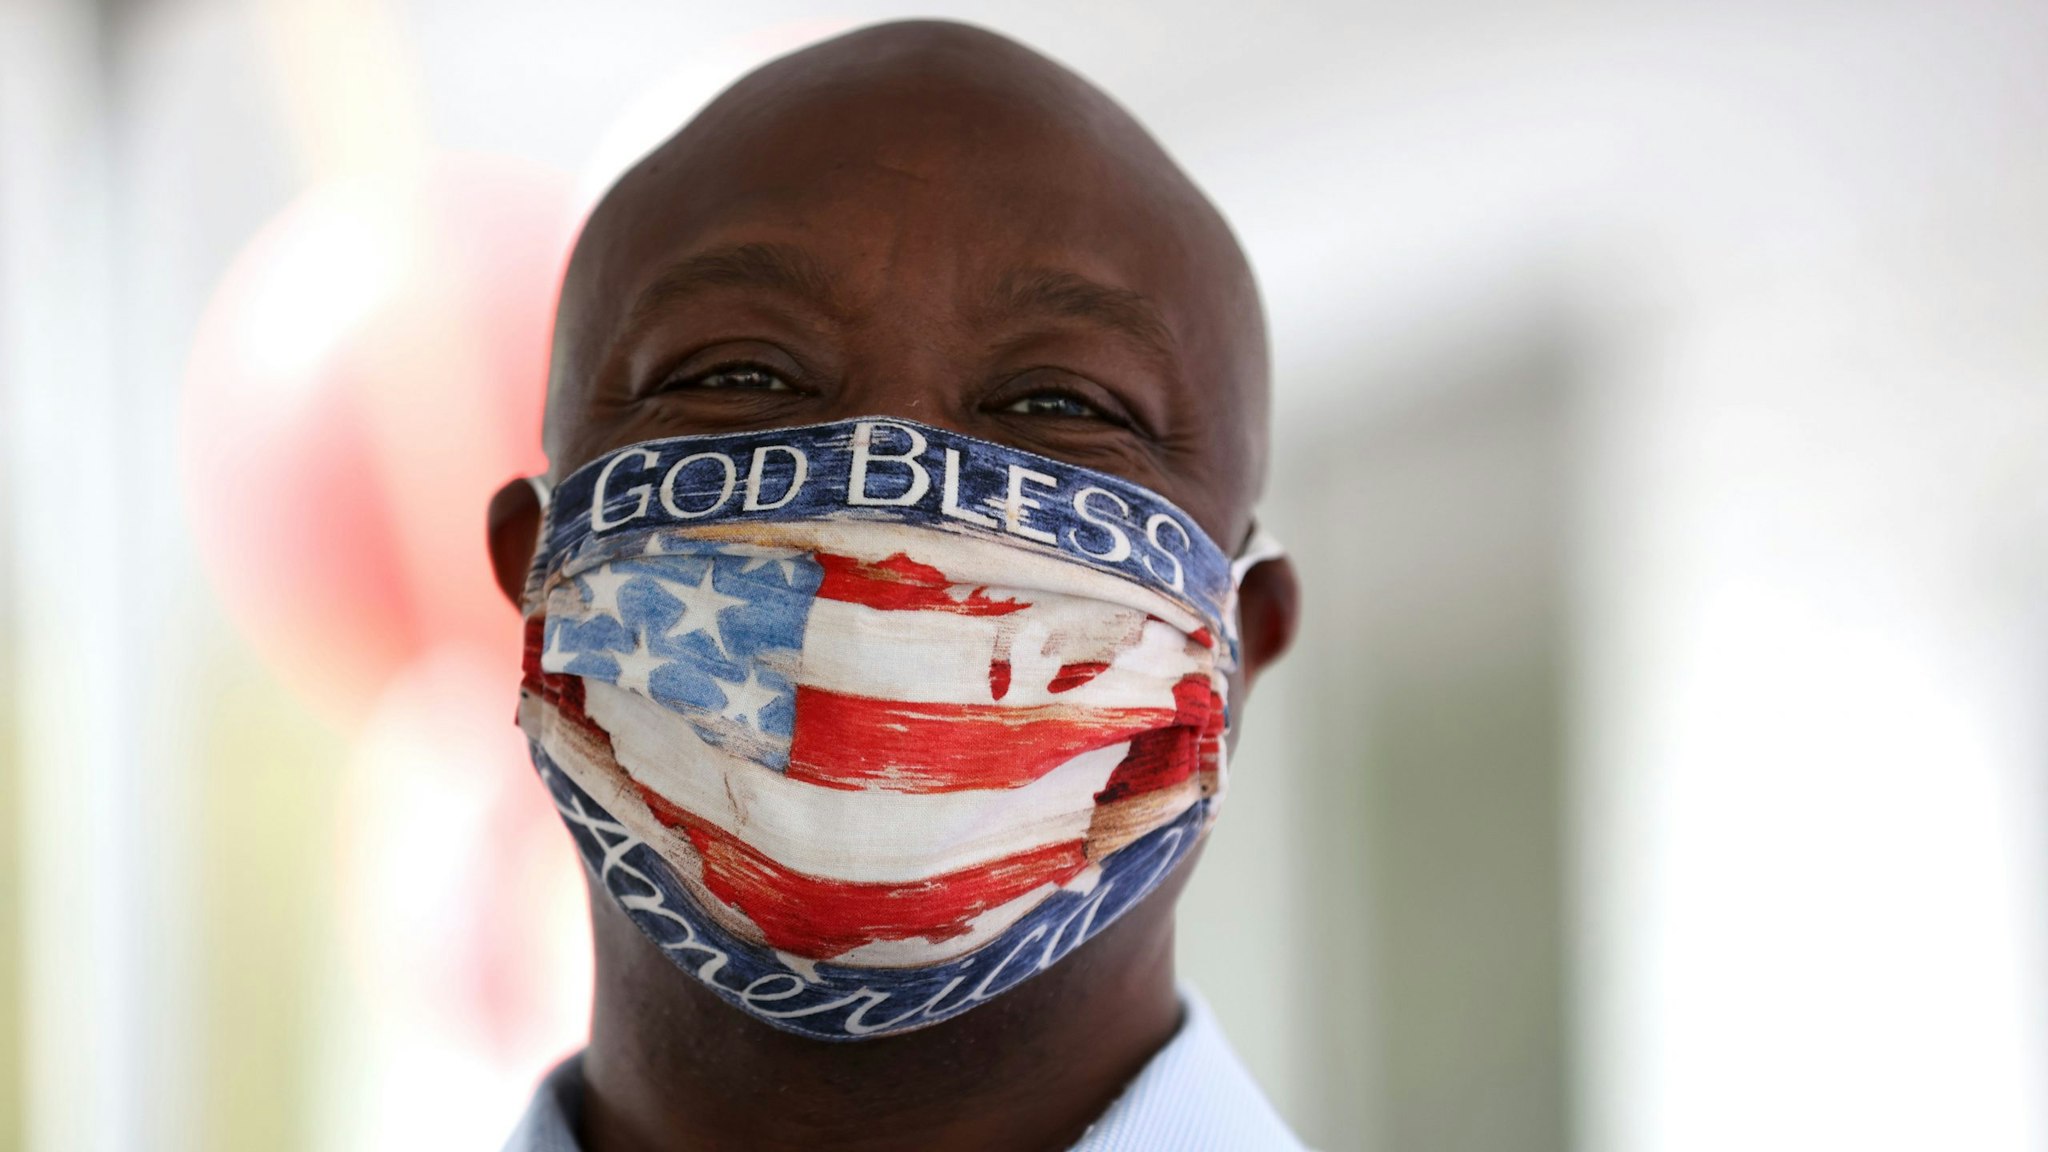 DOUGLASVILLE, GEORGIA - OCTOBER 28: U.S. Sen. Tim Scott (R-SC) wears a face mask that reads "God Bless America" during a campaign event with U.S. Sen. Kelly Loeffler (R-GA) at Metro Garage Door on October 28, 2020 in Douglasville, Georgia. Sen. Loeffler is running for re-election after being appointed by Georgia Governor Brian Kemp in January following the retirement of Sen. Johnny Isakson (R-GA).